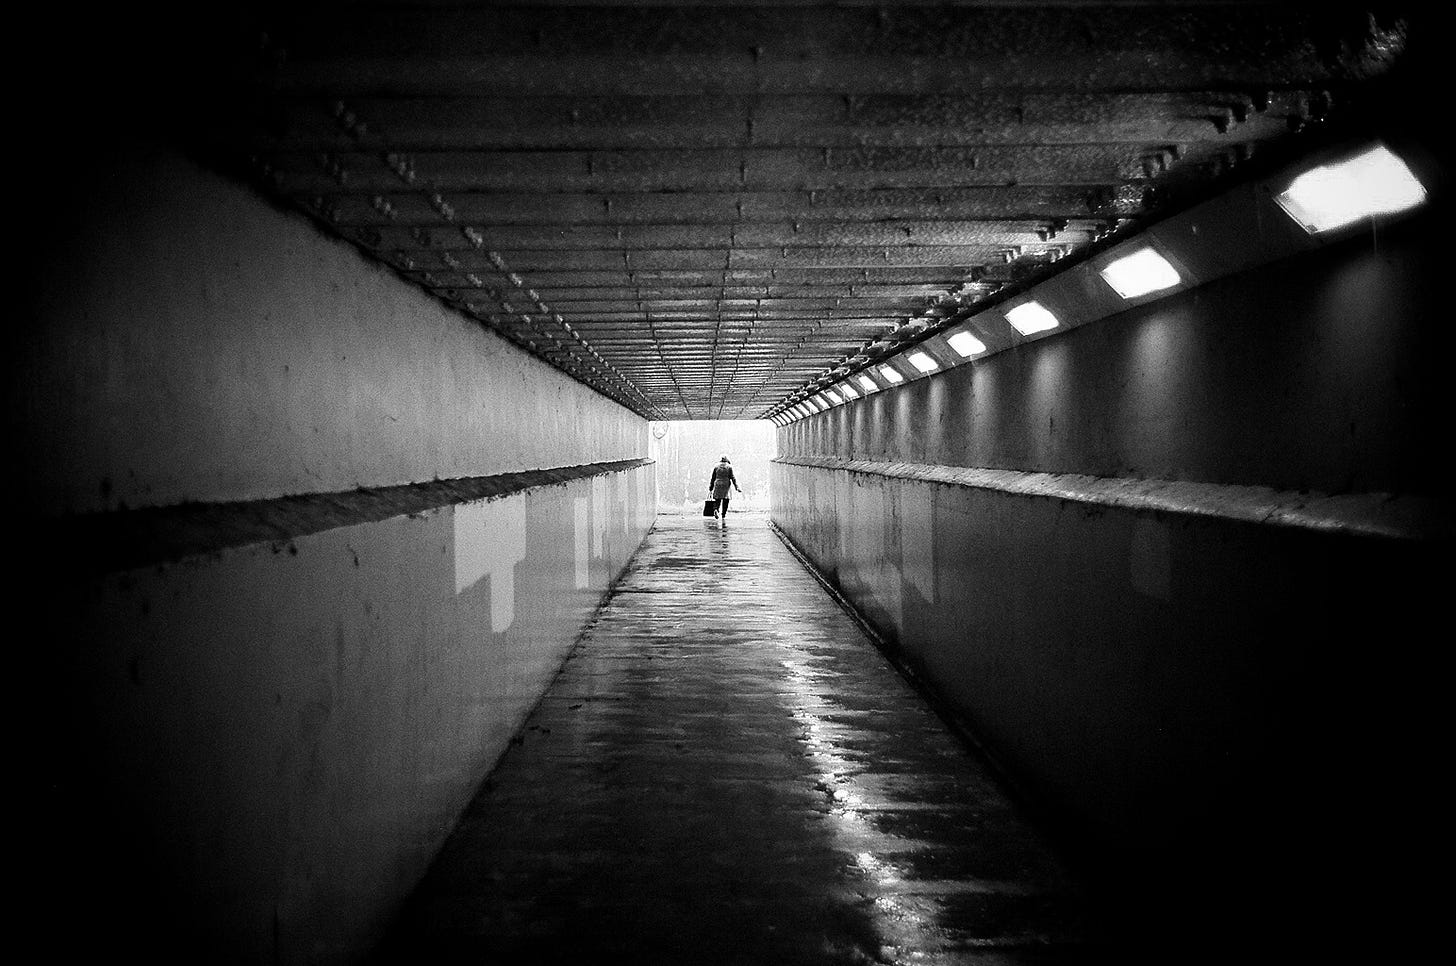 A black and white photo of a lady walking down an underpass. I walk down this way every seek but can't remember taking this photo. 